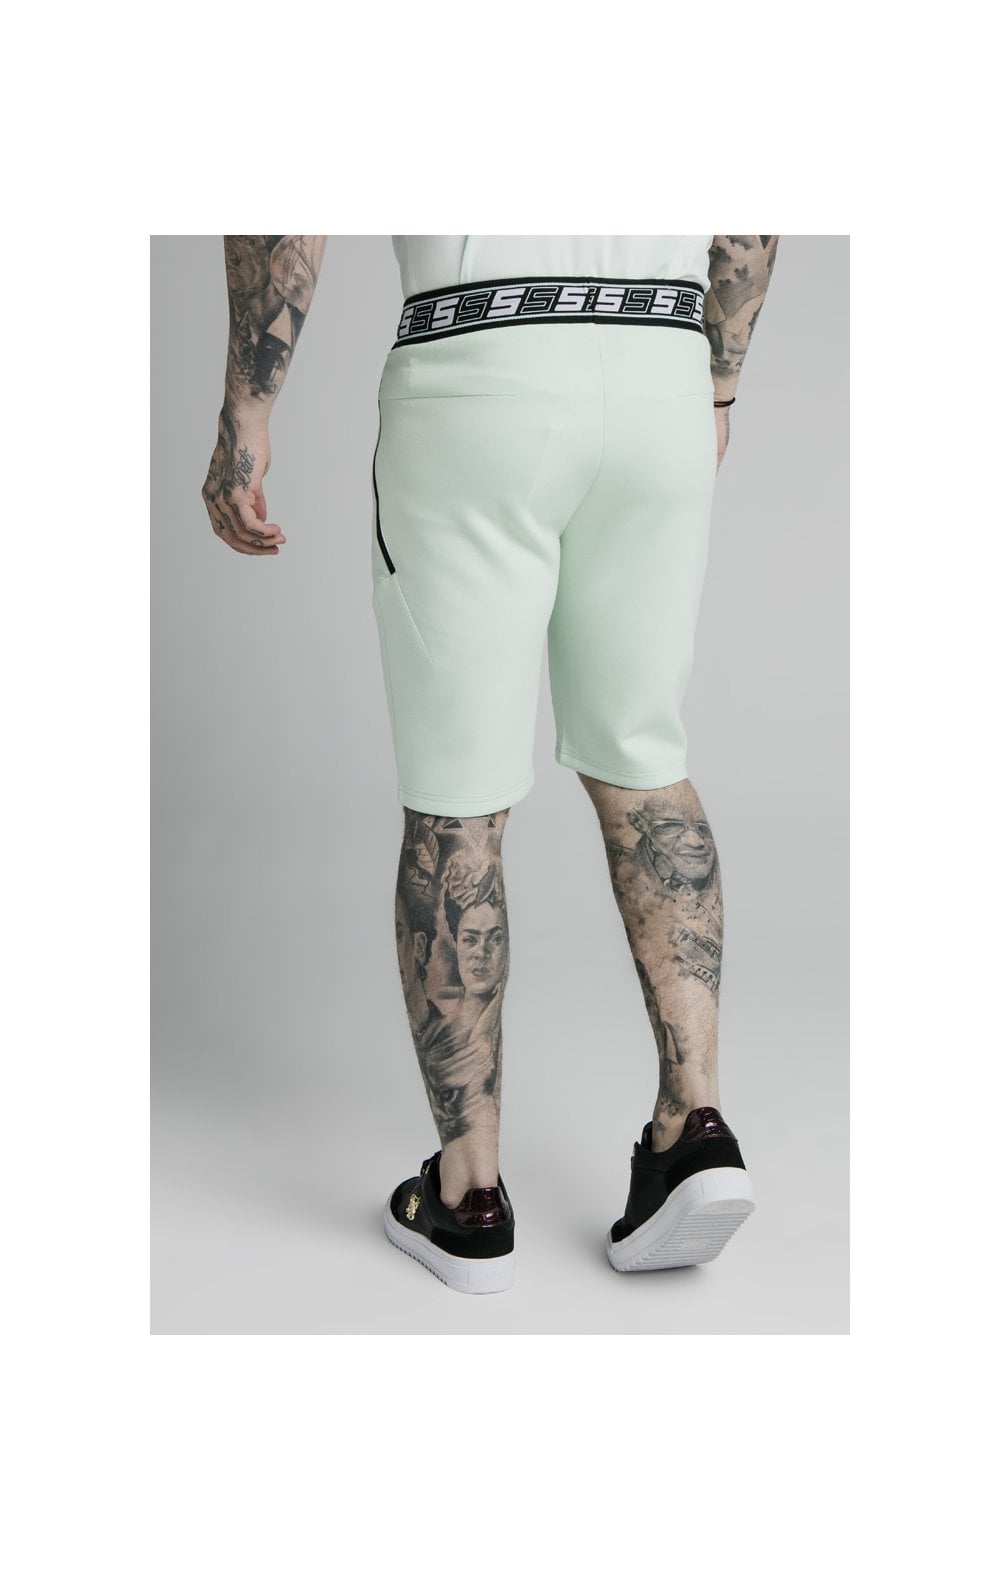 Load image into Gallery viewer, SikSilk Exhibit Function Shorts - Aqua Teal (1)